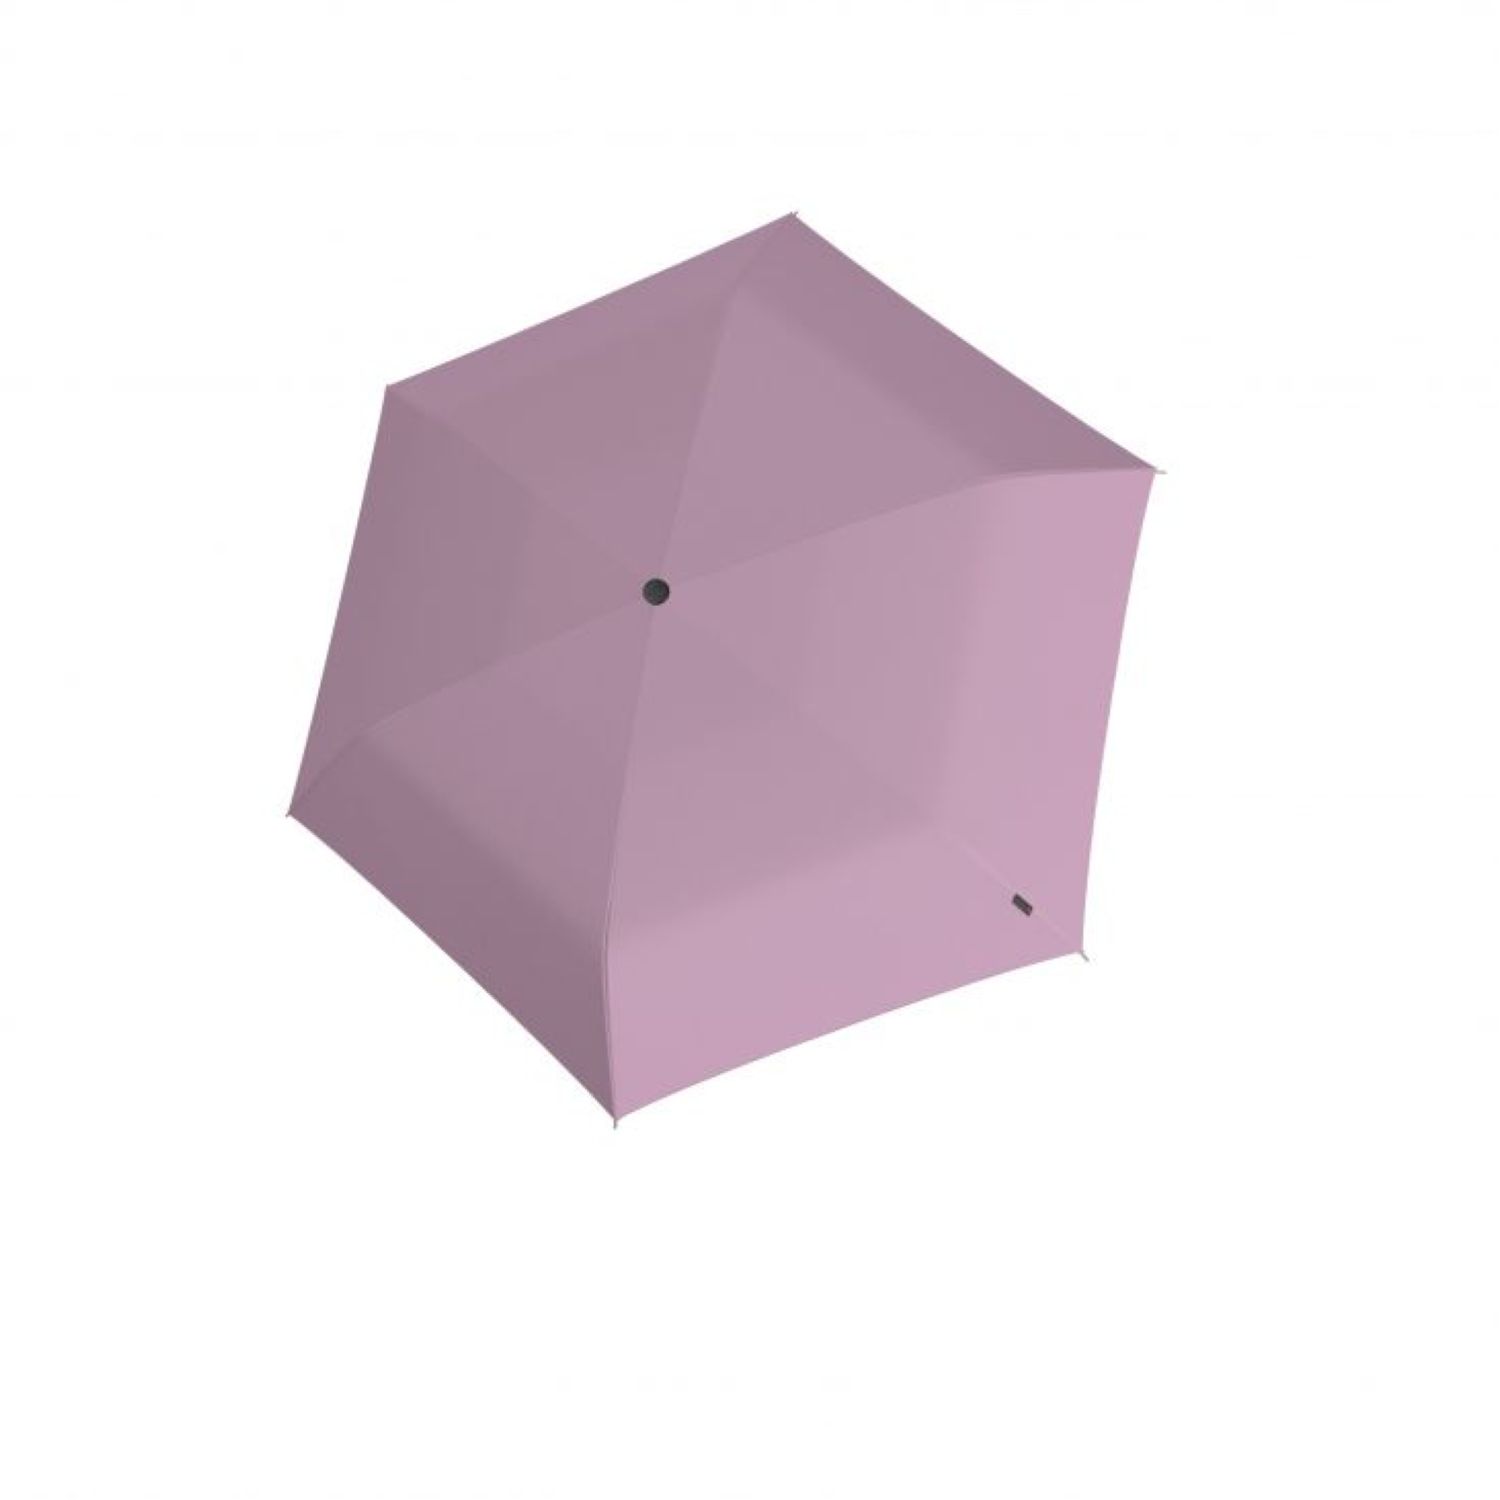 Buy Knirps Us.050 Ultra Light Slim Manual UV Protection Umbrella - Rose  with HeatShield Coating in Malaysia - The Planet Traveller MY